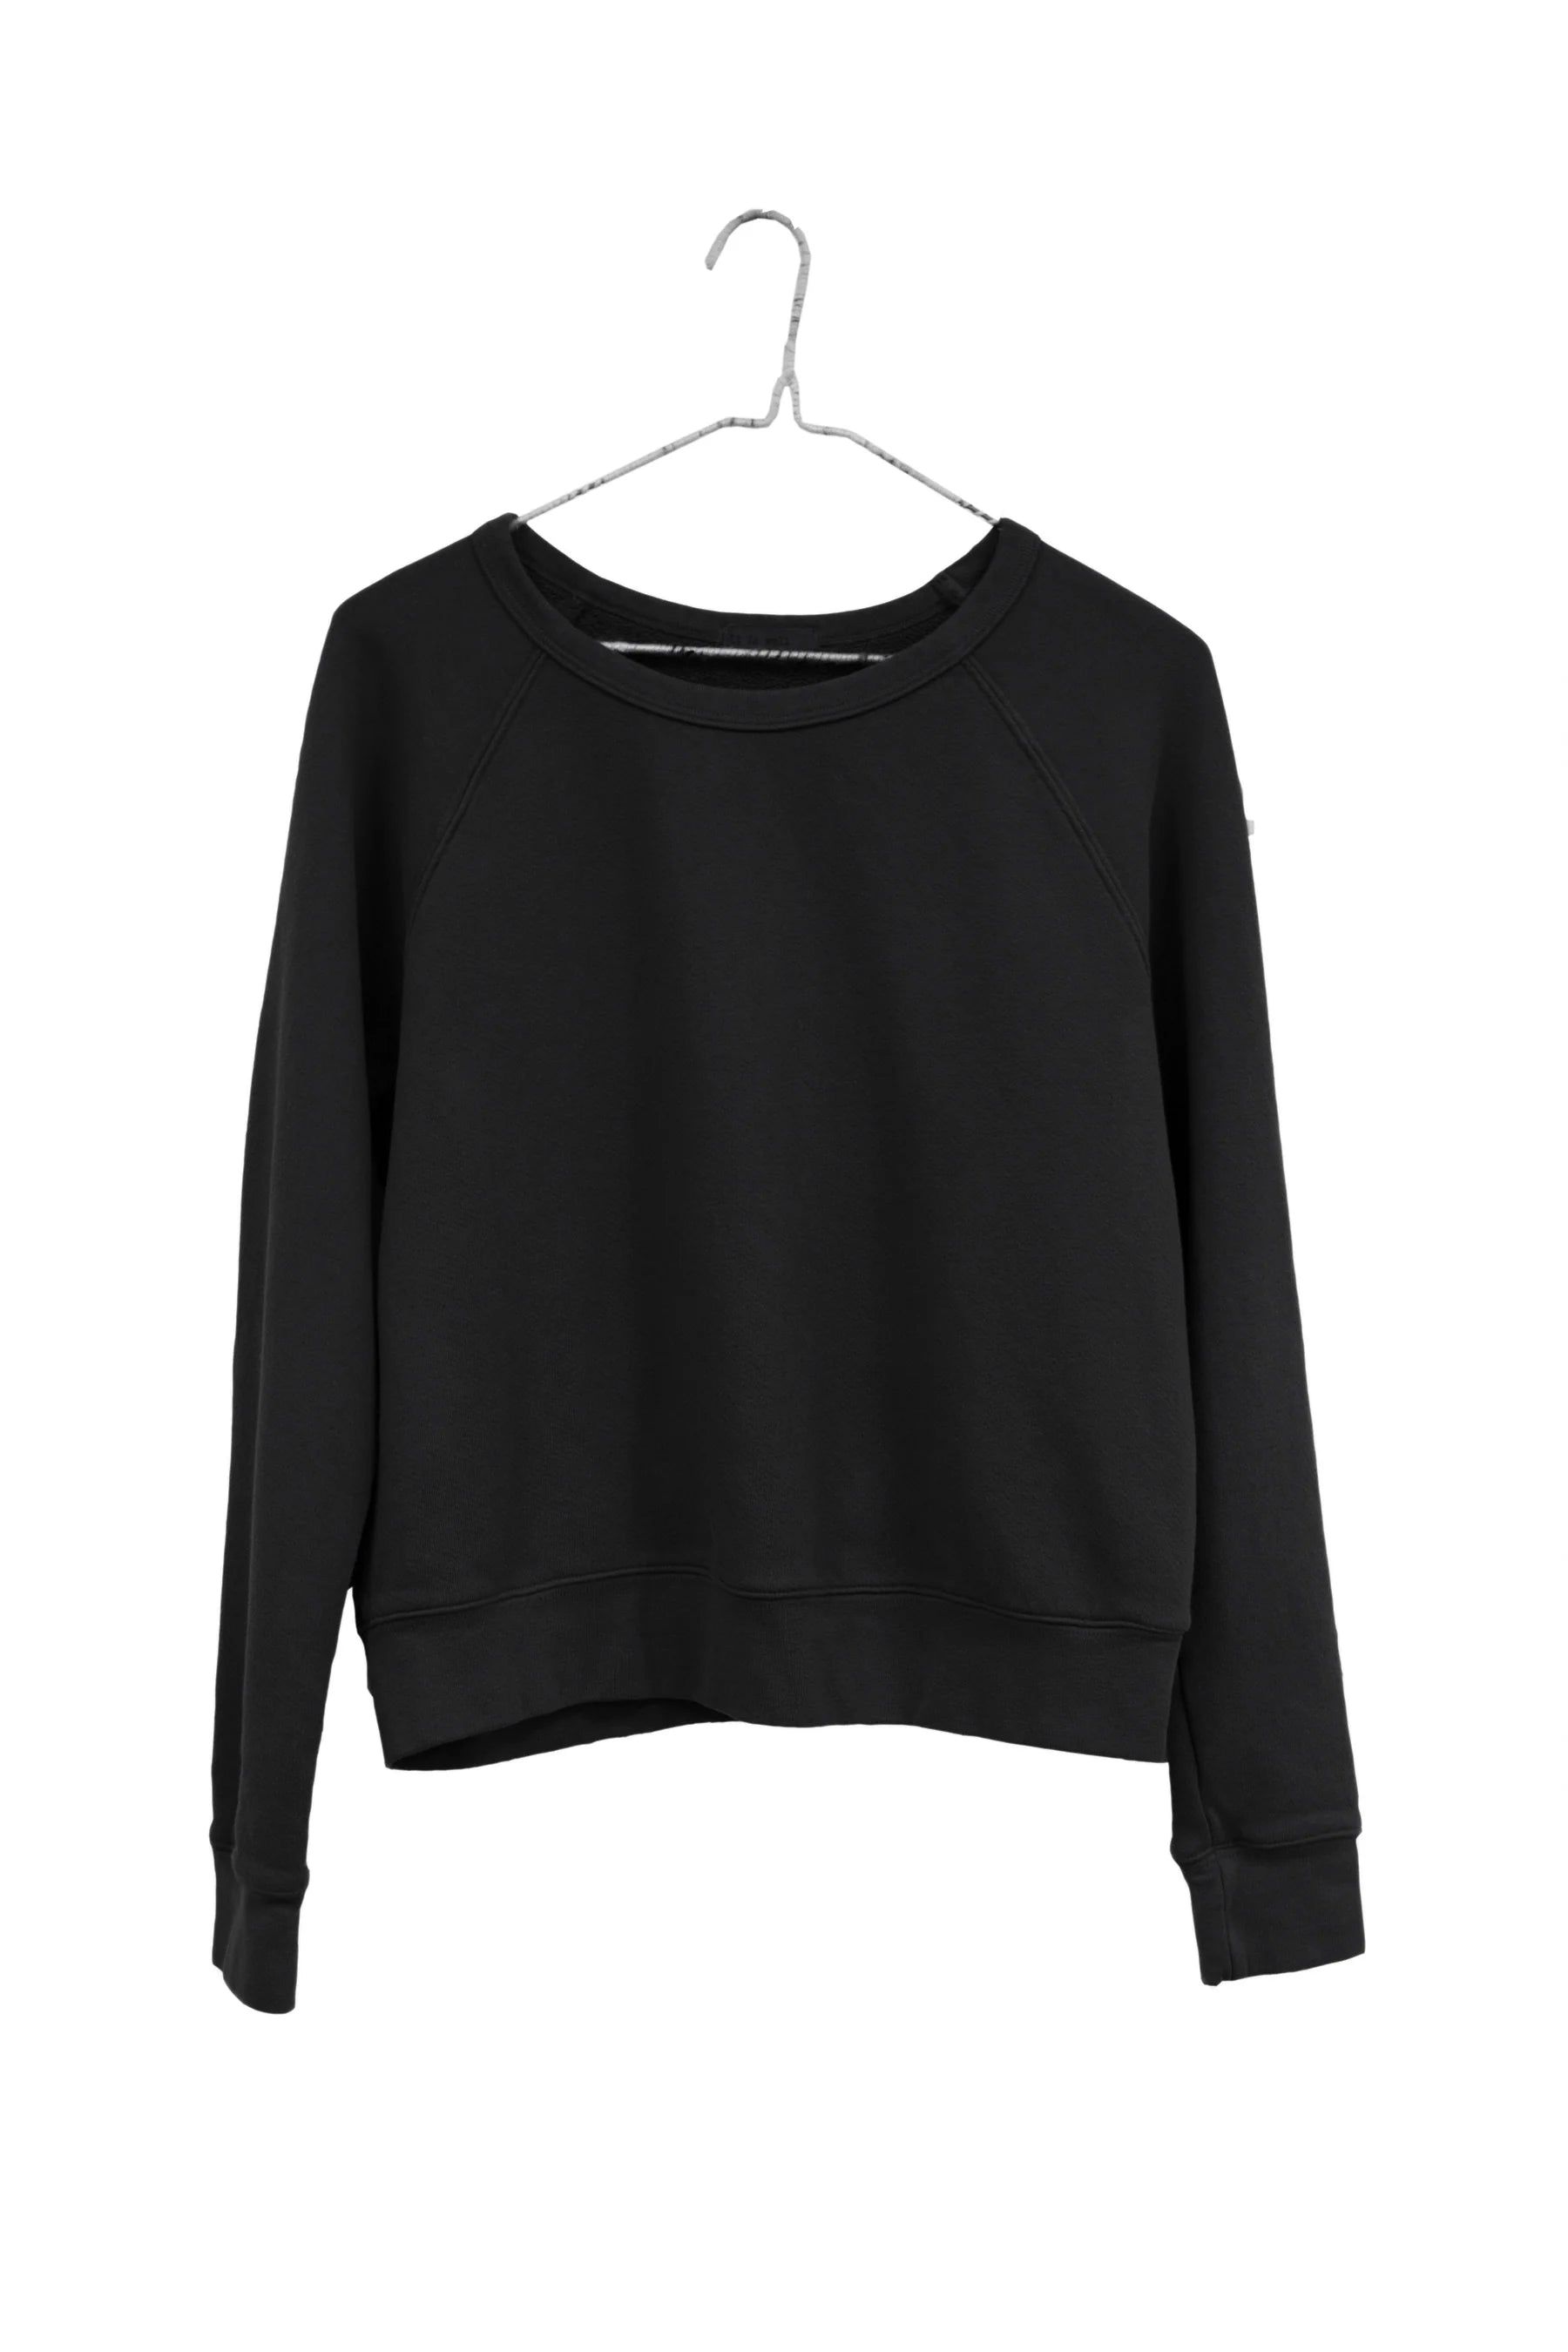 It Is Well LA - Elevated Ethical Basics Made in USA - French Terry Cotton Raglan Sweatshirt